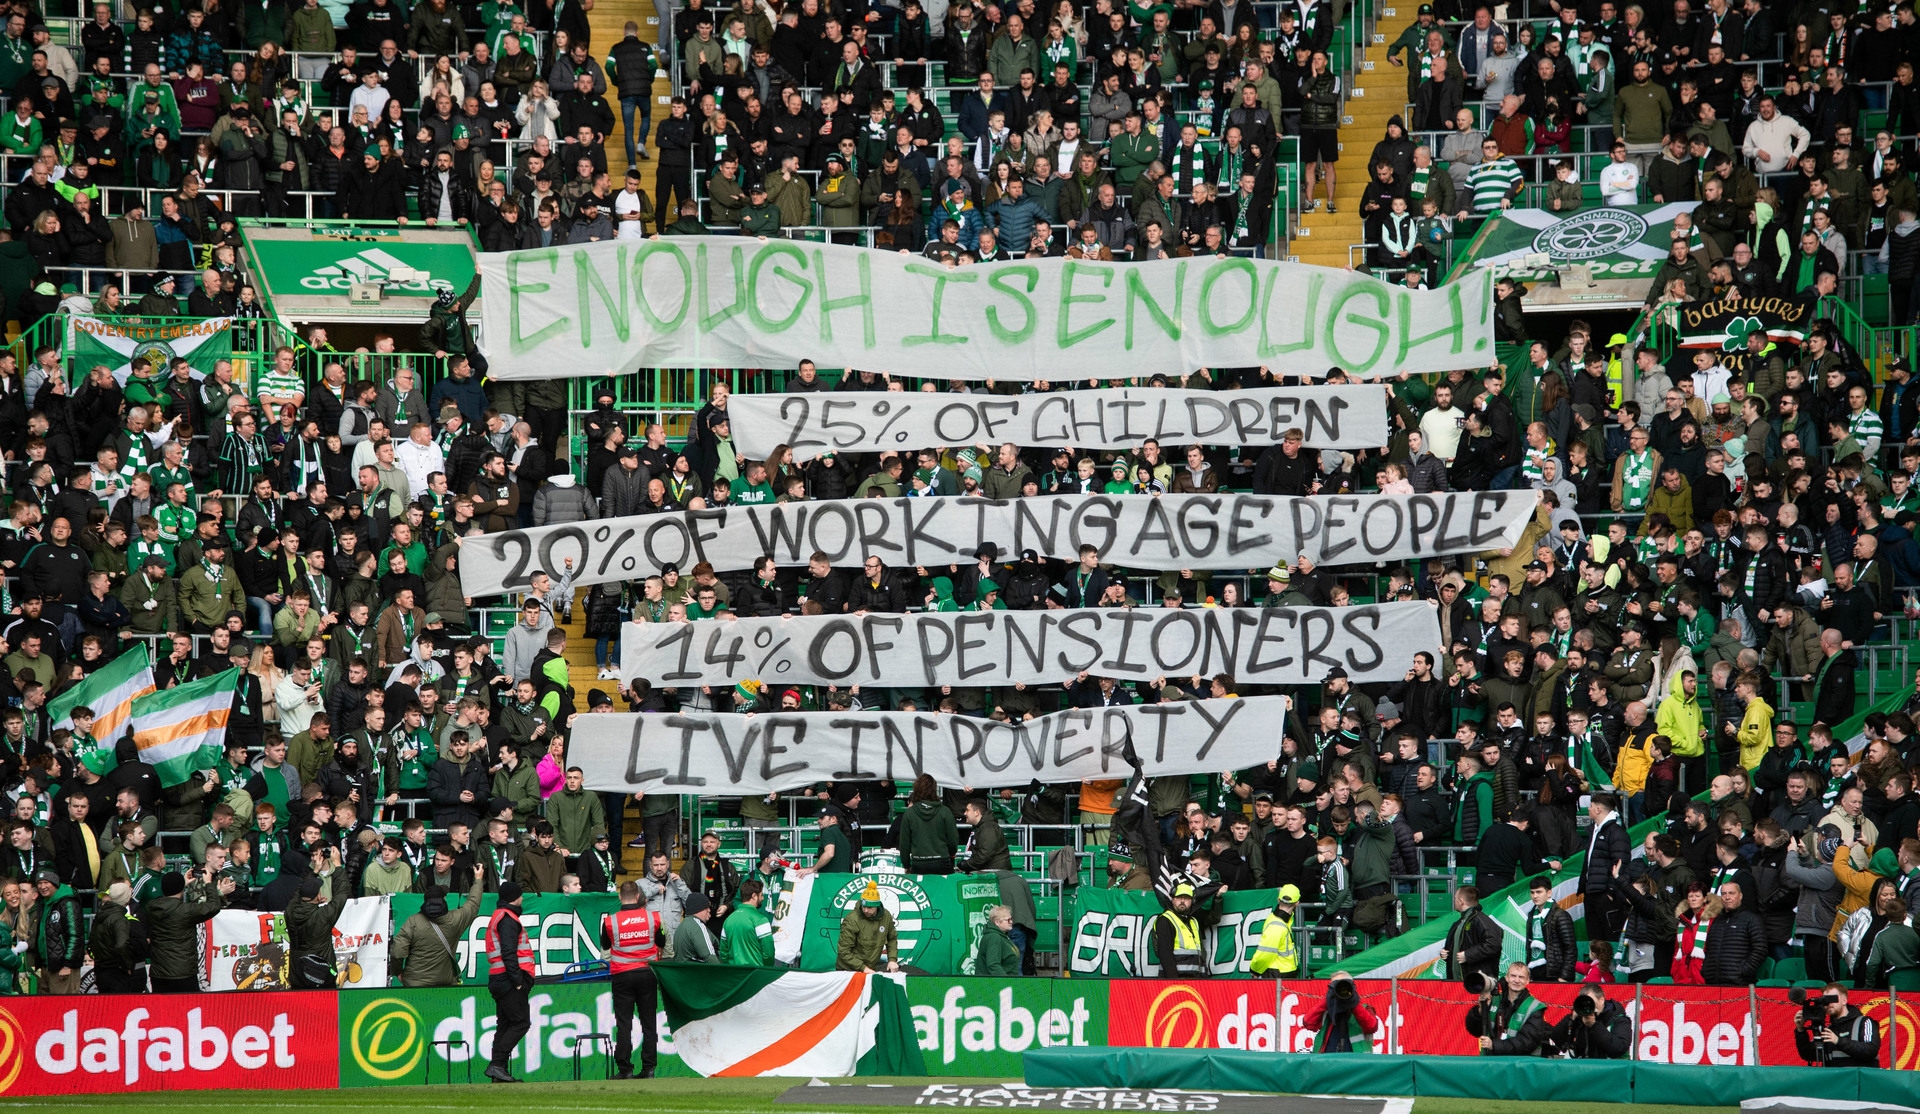 'Enough is enough': Celtic fans highlight poverty issues with pre-match banner. 